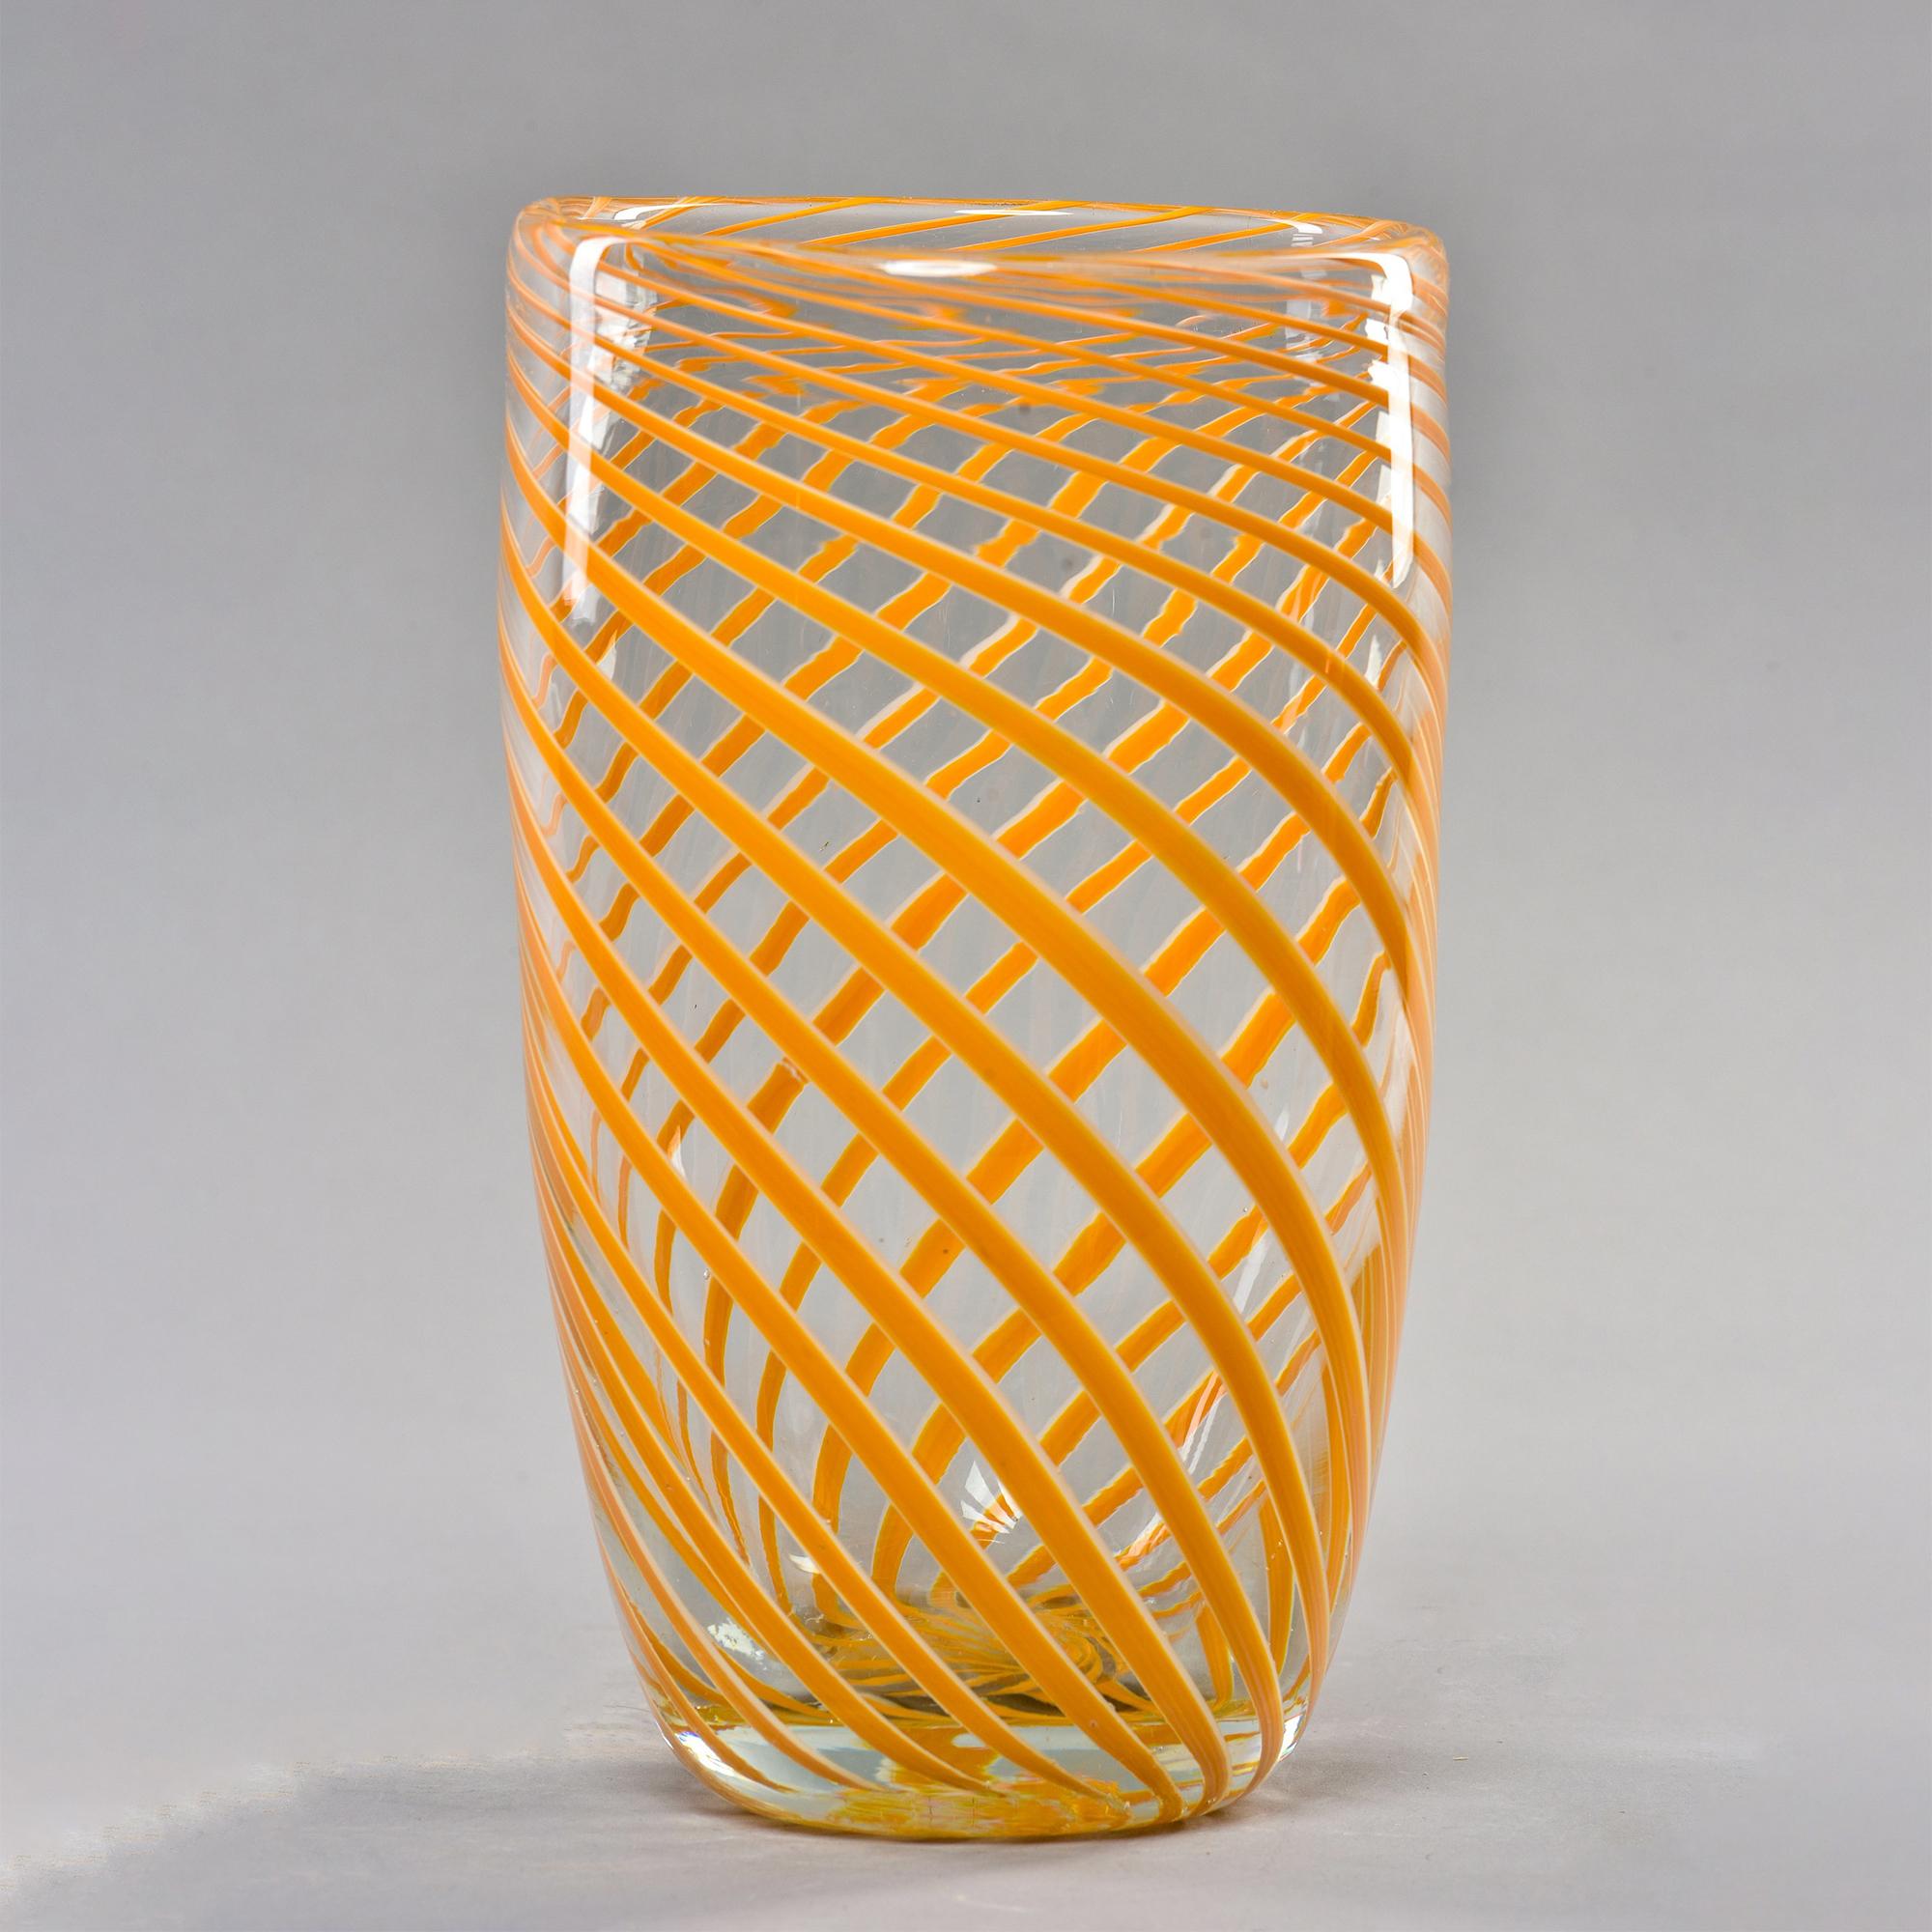 Circa 1970s murano vase in clear glass with orange spiral stripe. Unknown Murano maker. Very good vintage condition with minor scattered surface wear - no damage found.